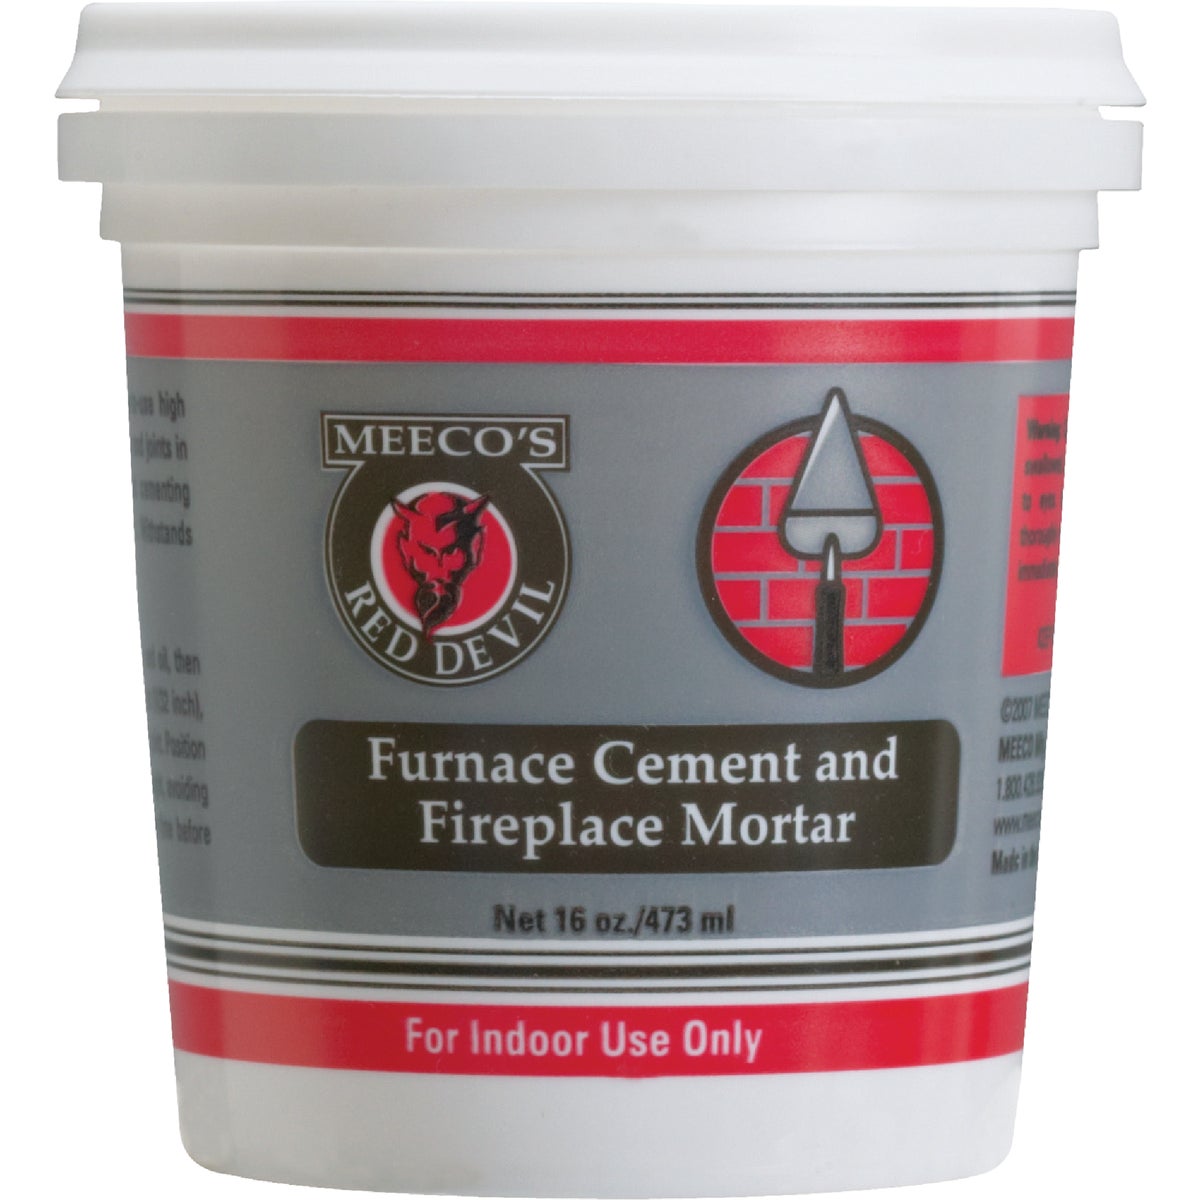 Meeco's Red Devil 1 Pt. Gray Furnace Cement & Fireplace Mortar